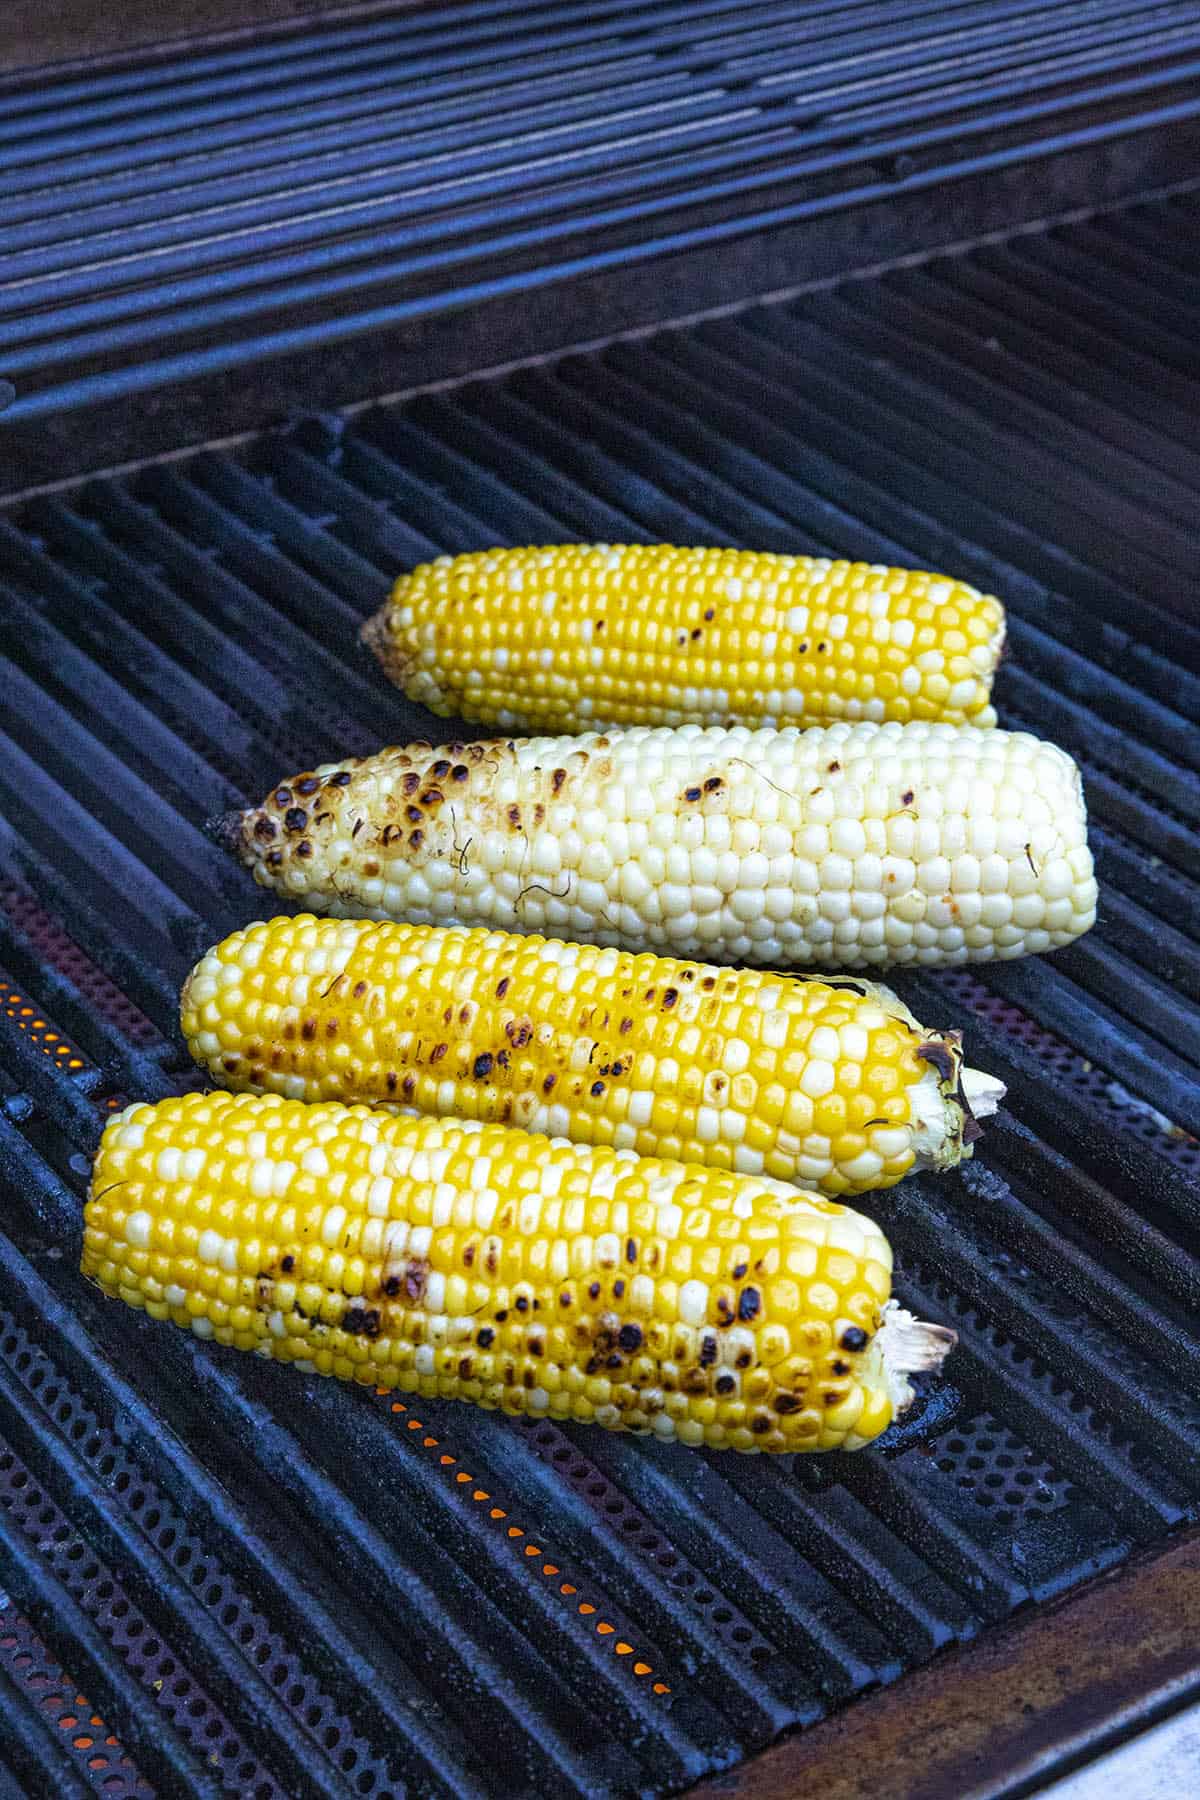 Grilling corn to make elotes